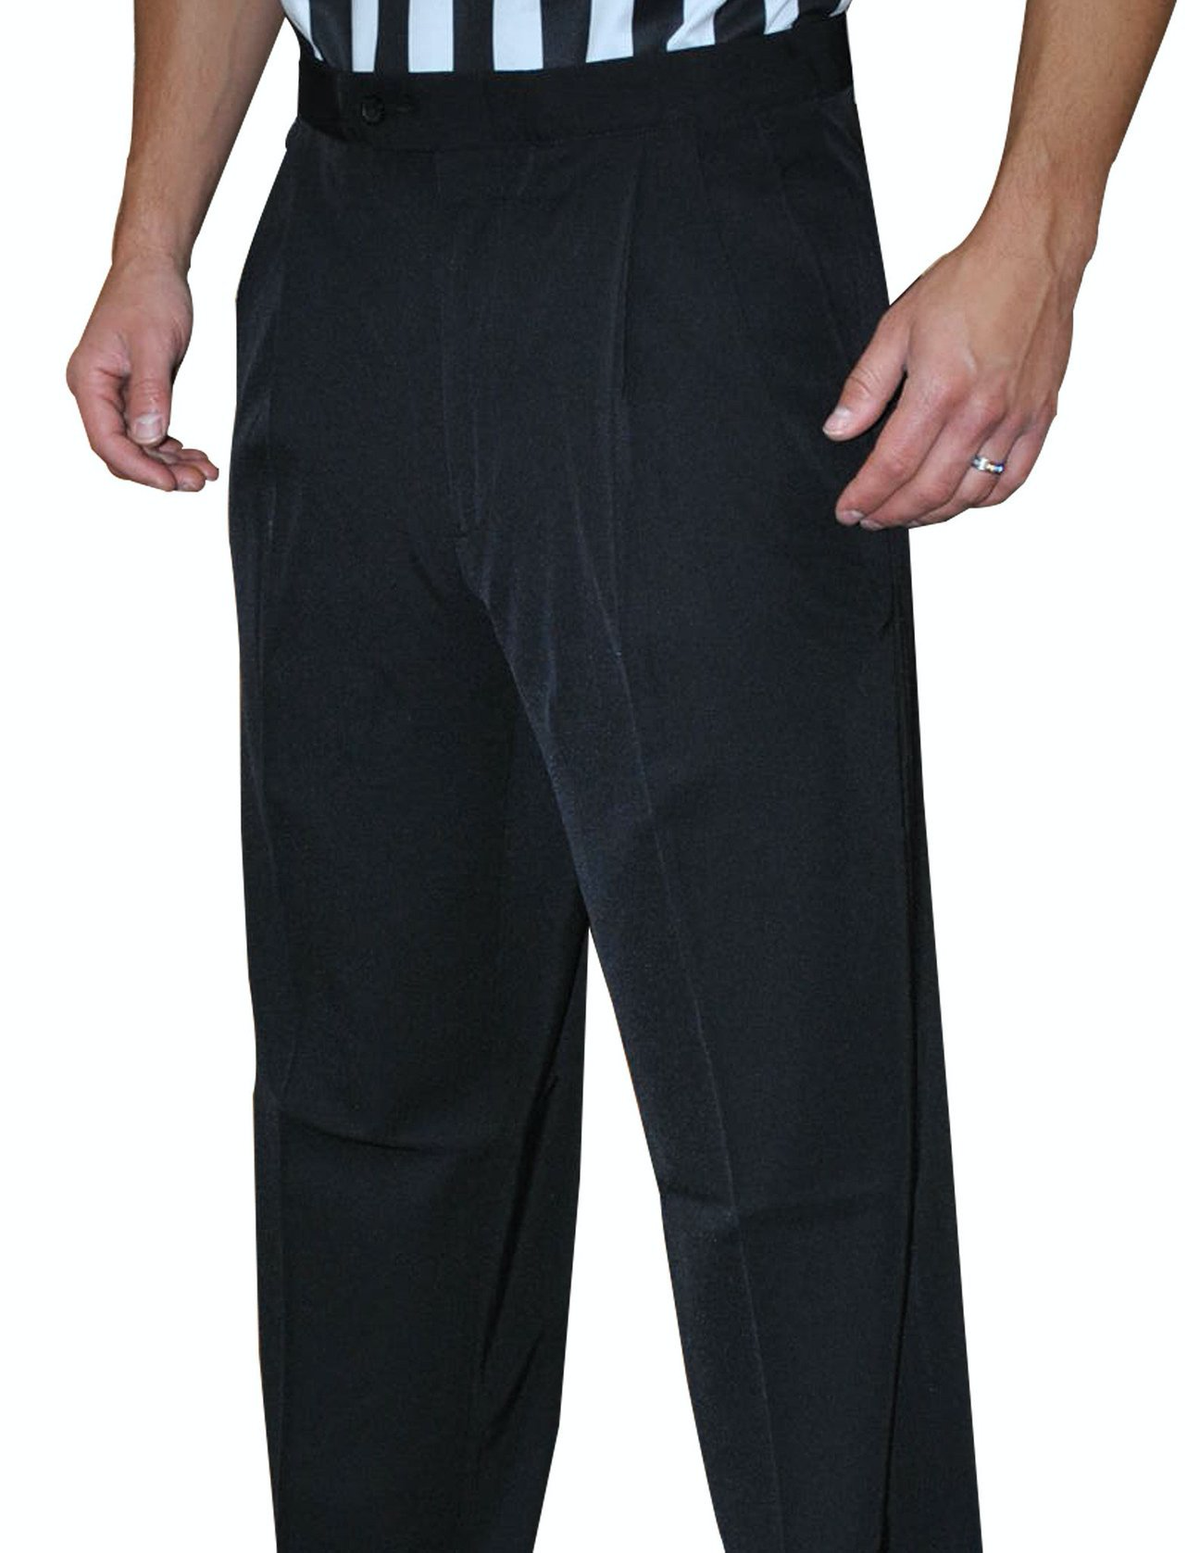 Smitty | BKS-297 | NEW TAPERED FIT | 4-Way Stretch Flat Front Referee Pants w/ Slash Pockets | Basketball | Wrestling - Great Call Athletics